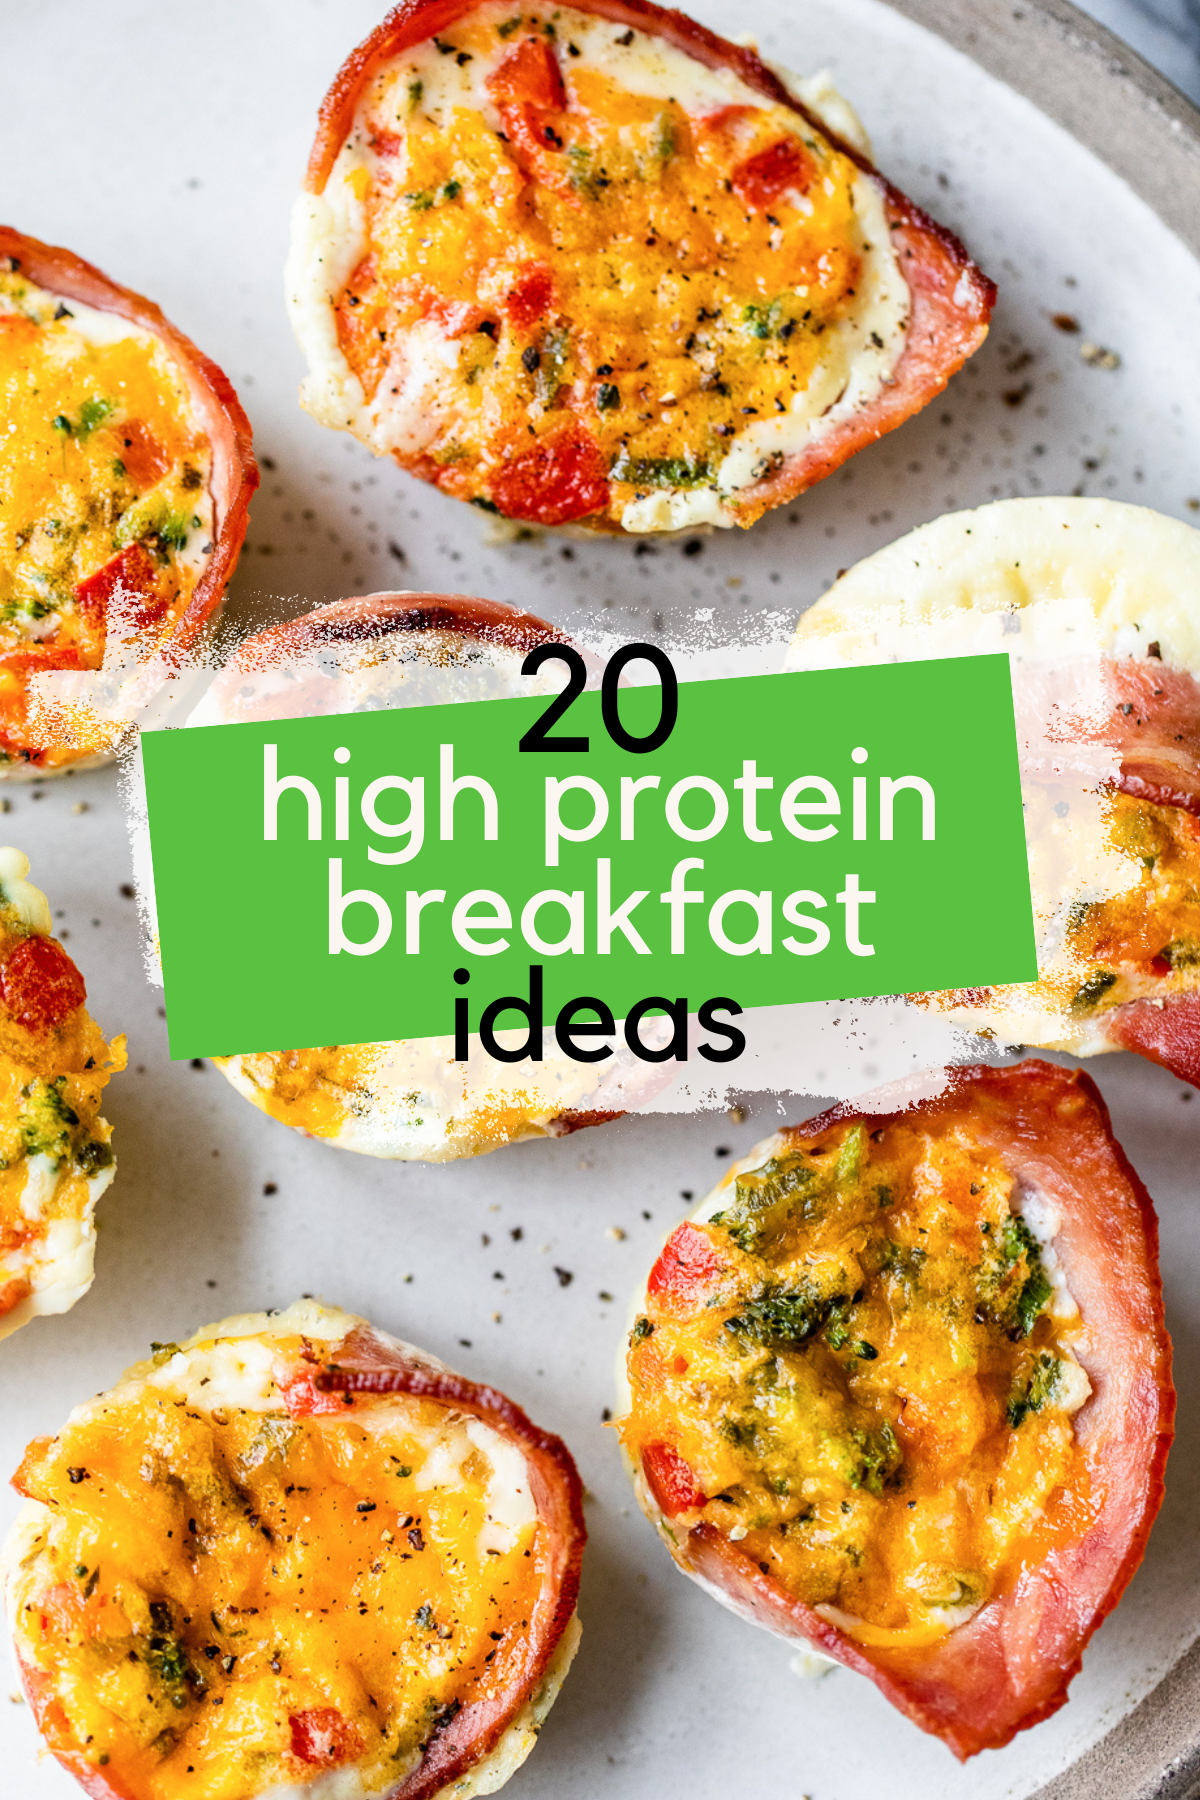 best slow-cooker breakfast recipes are healthy